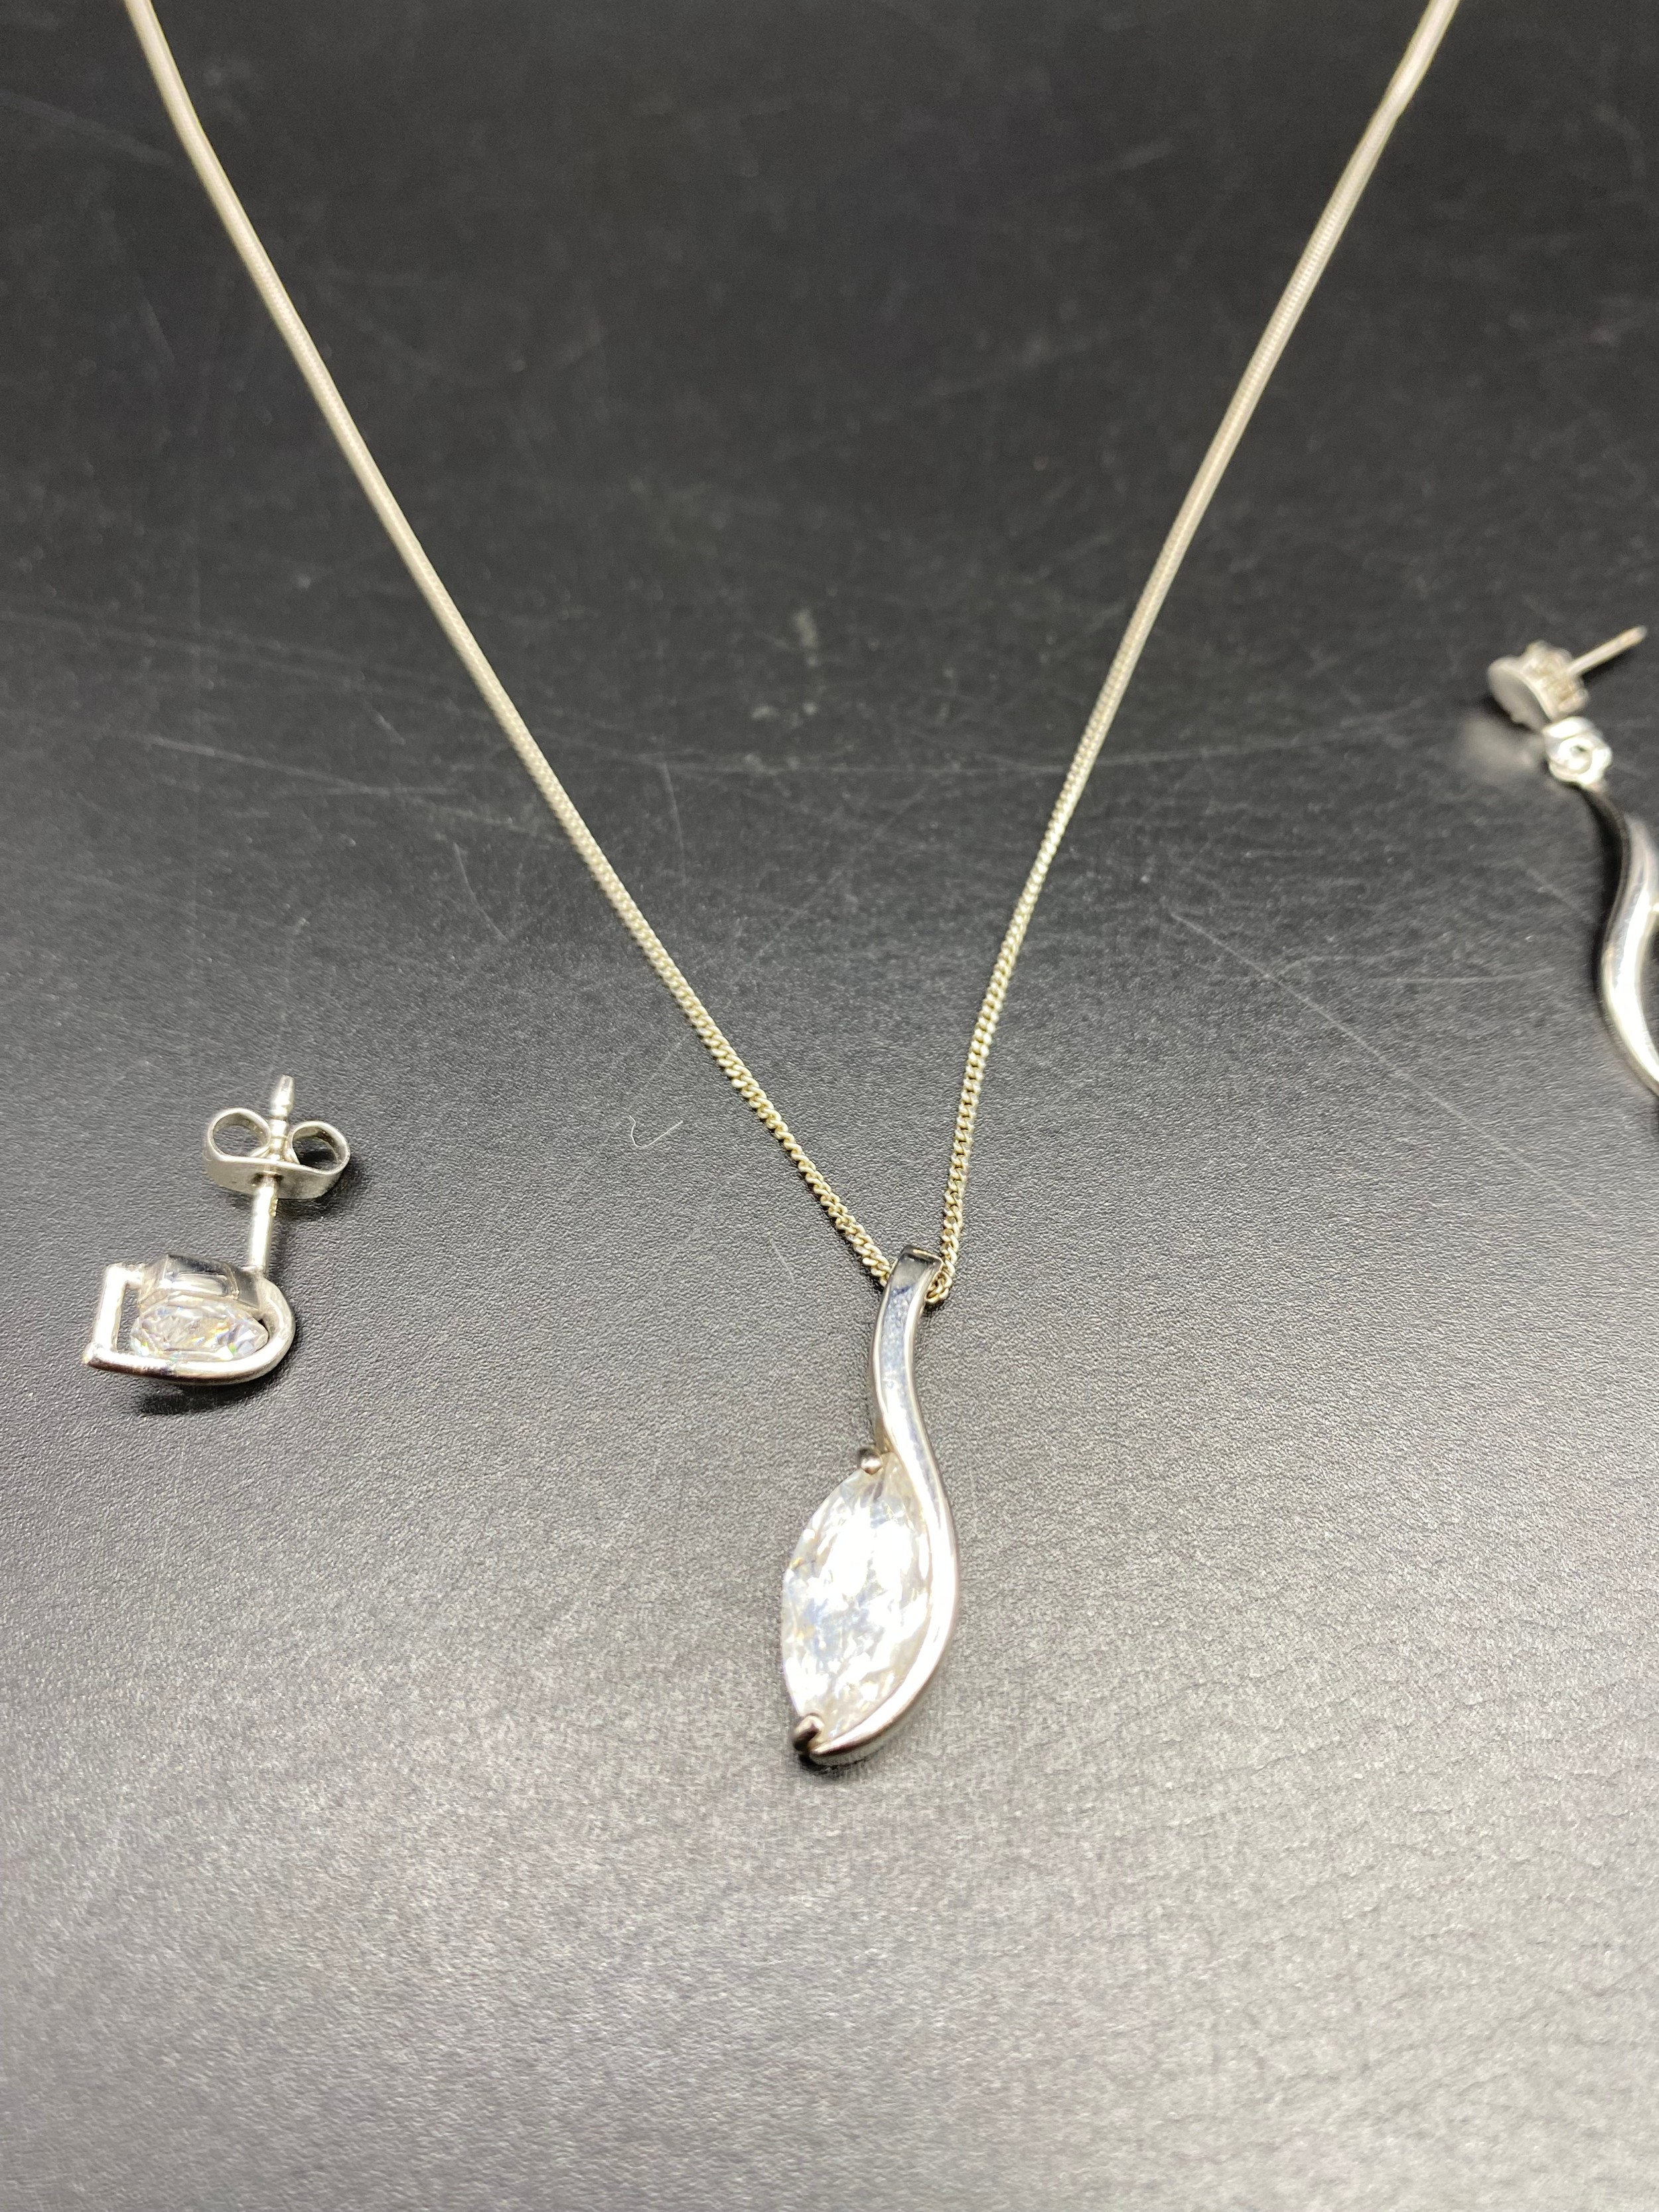 9ct white gold 375 hallmarked chain pendant & earrings set along with pair of white gold drop - Image 4 of 5